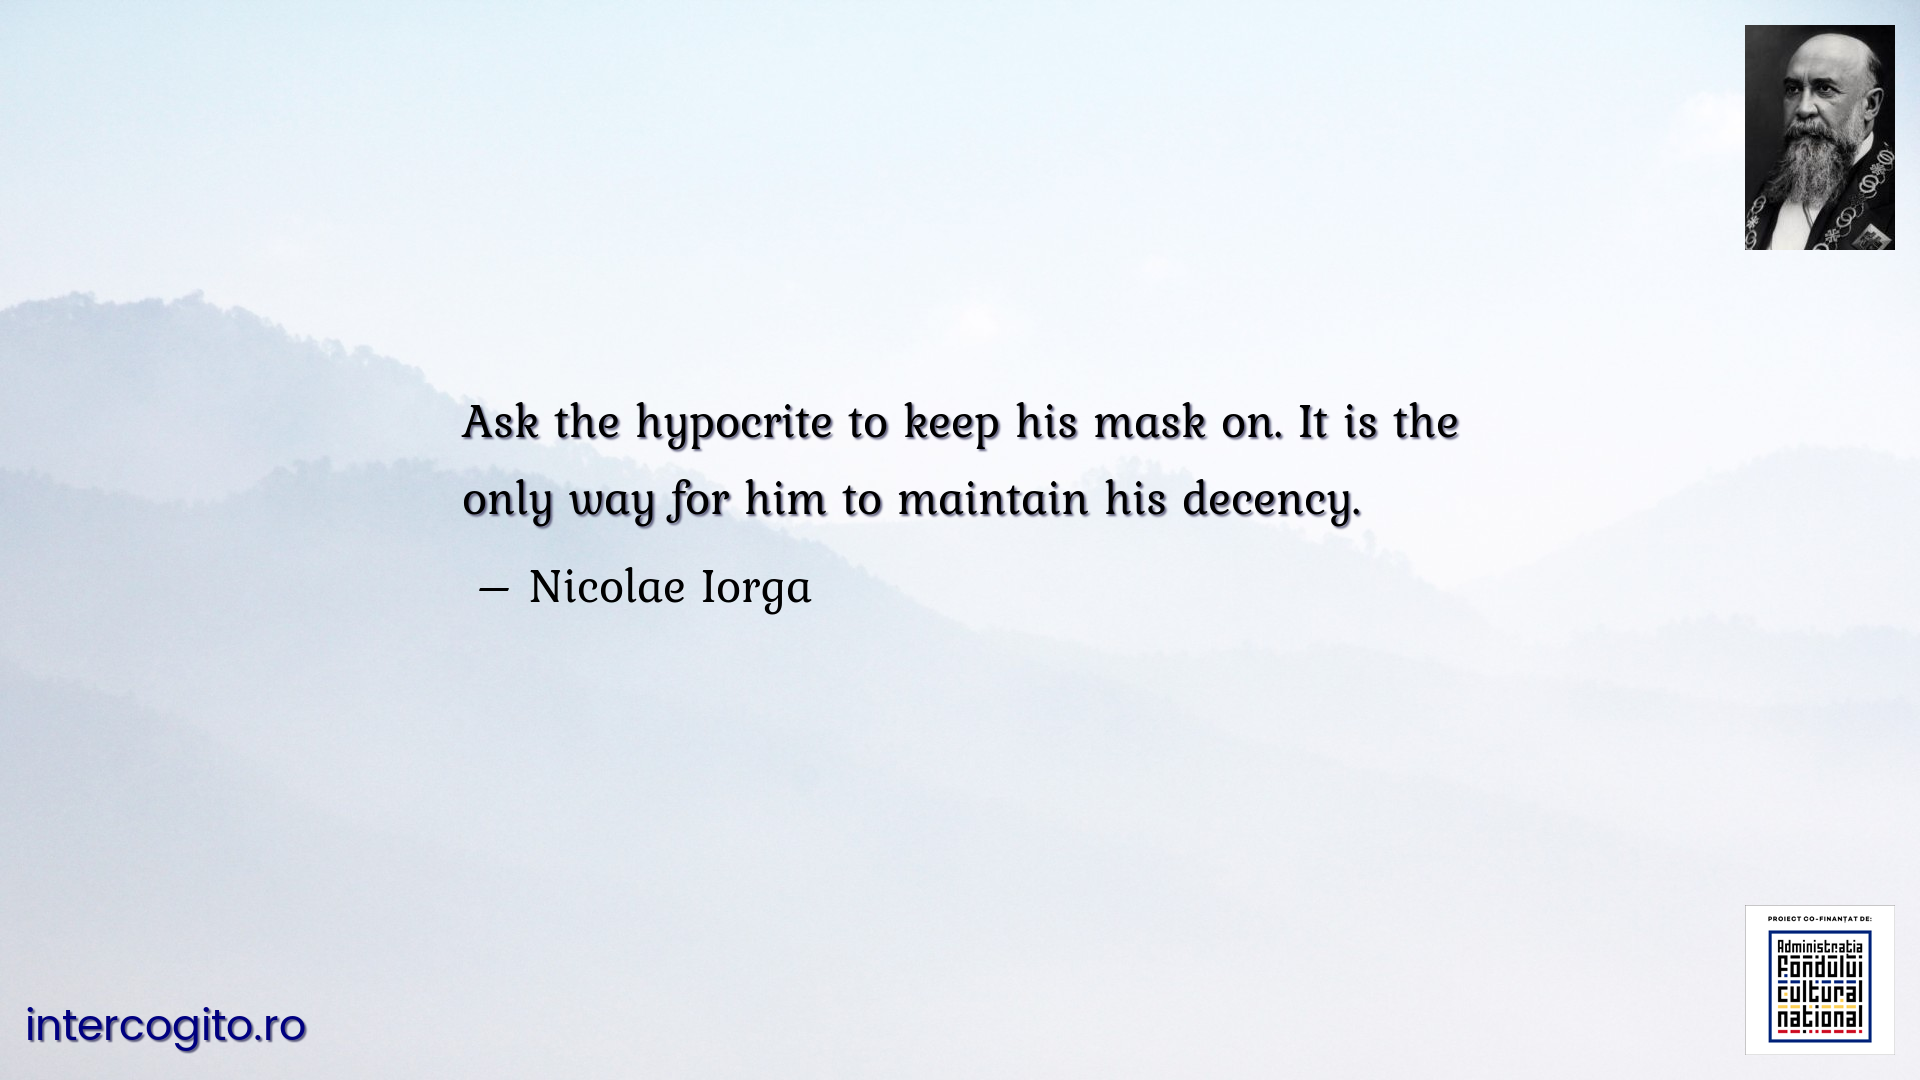 Ask the hypocrite to keep his mask on. It is the only way for him to maintain his decency.